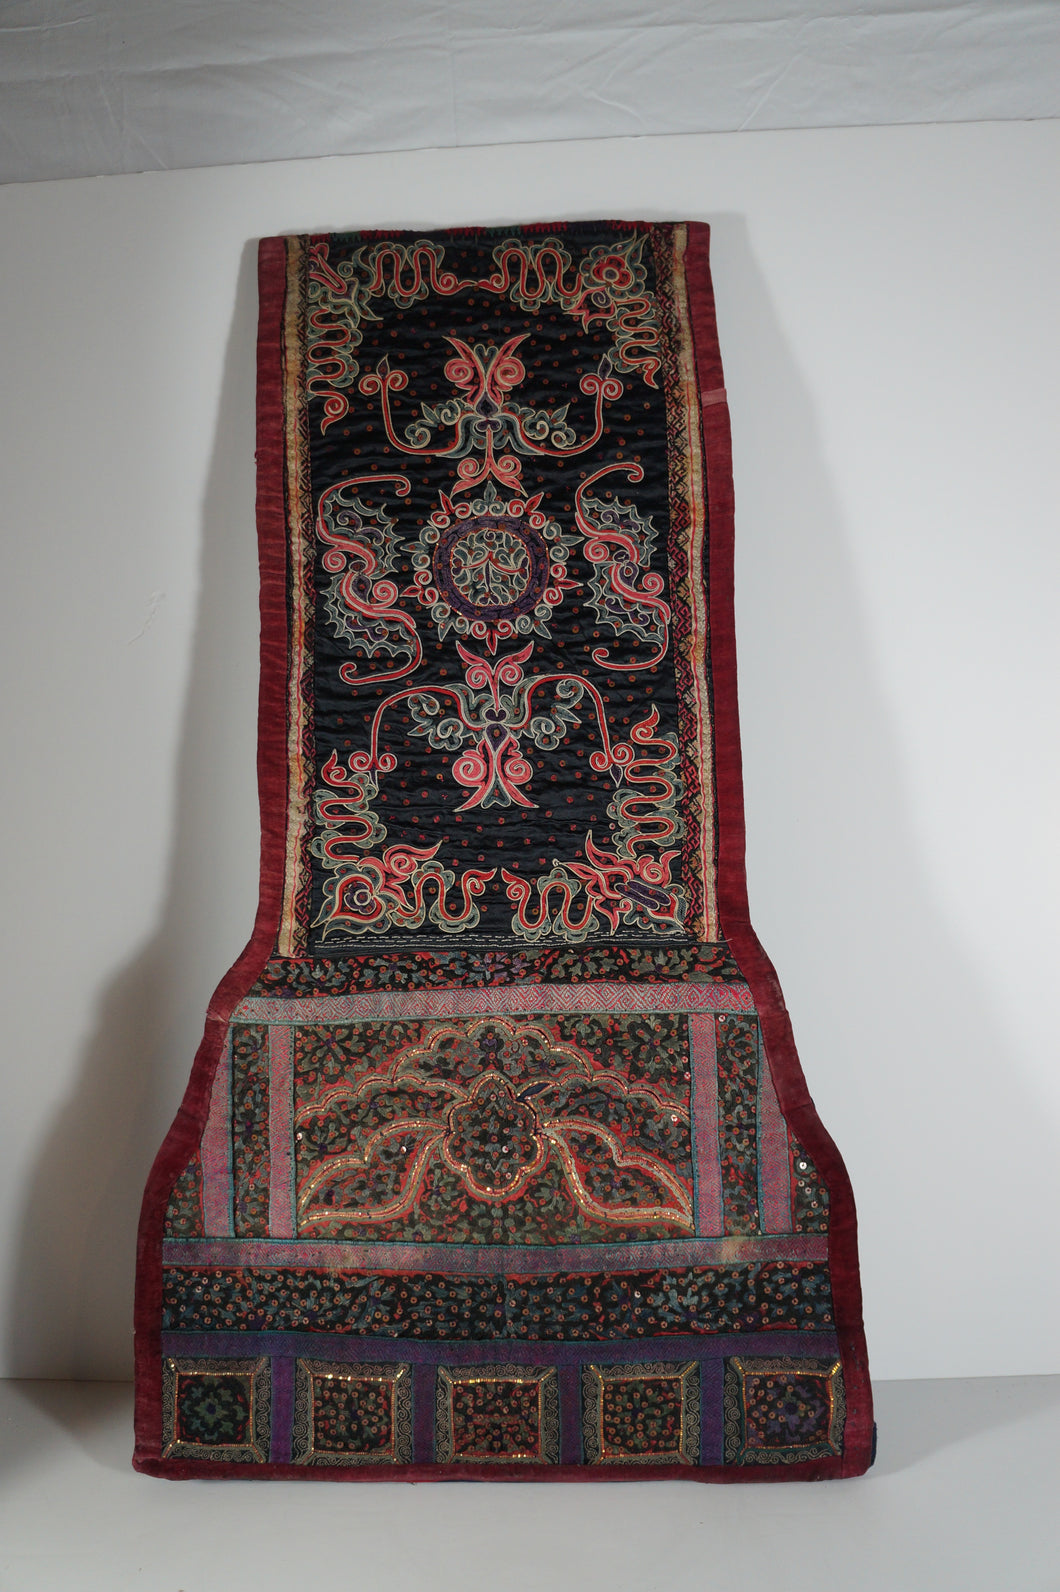 Chinese Minority Embroidery made into a Wall Hanging